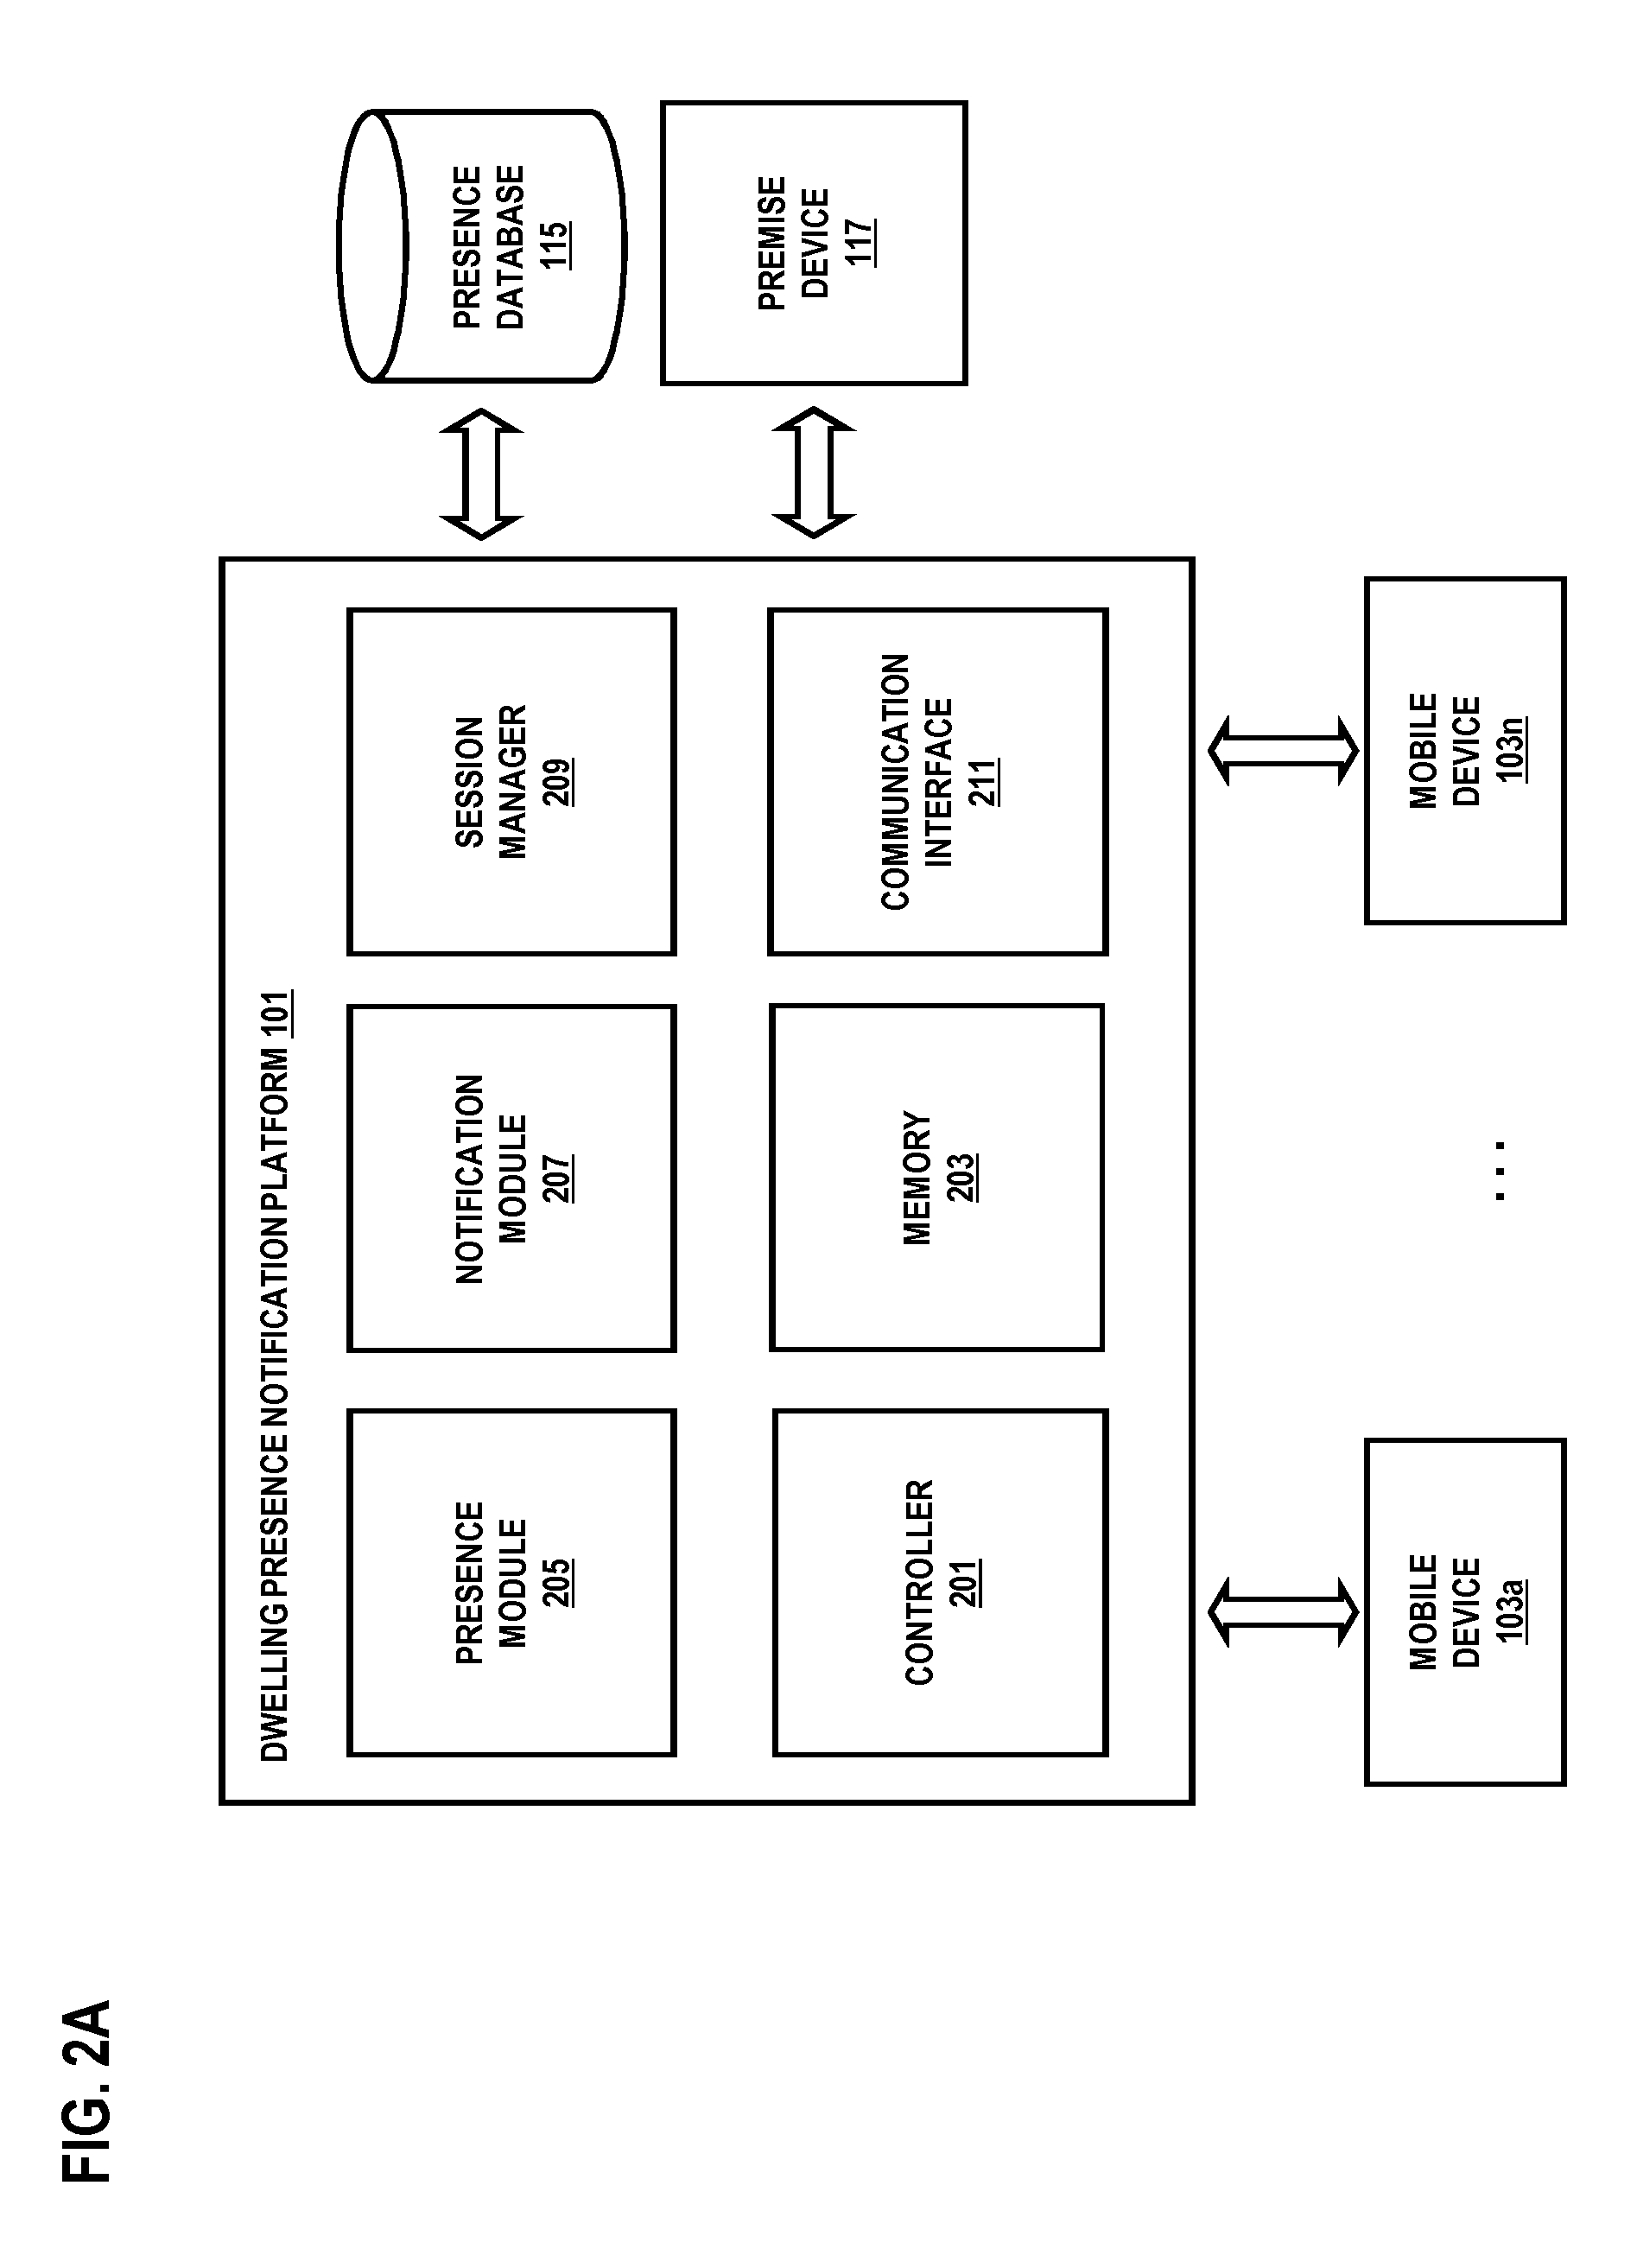 Method and system for providing presence-based communication over a cellular network for a dwelling